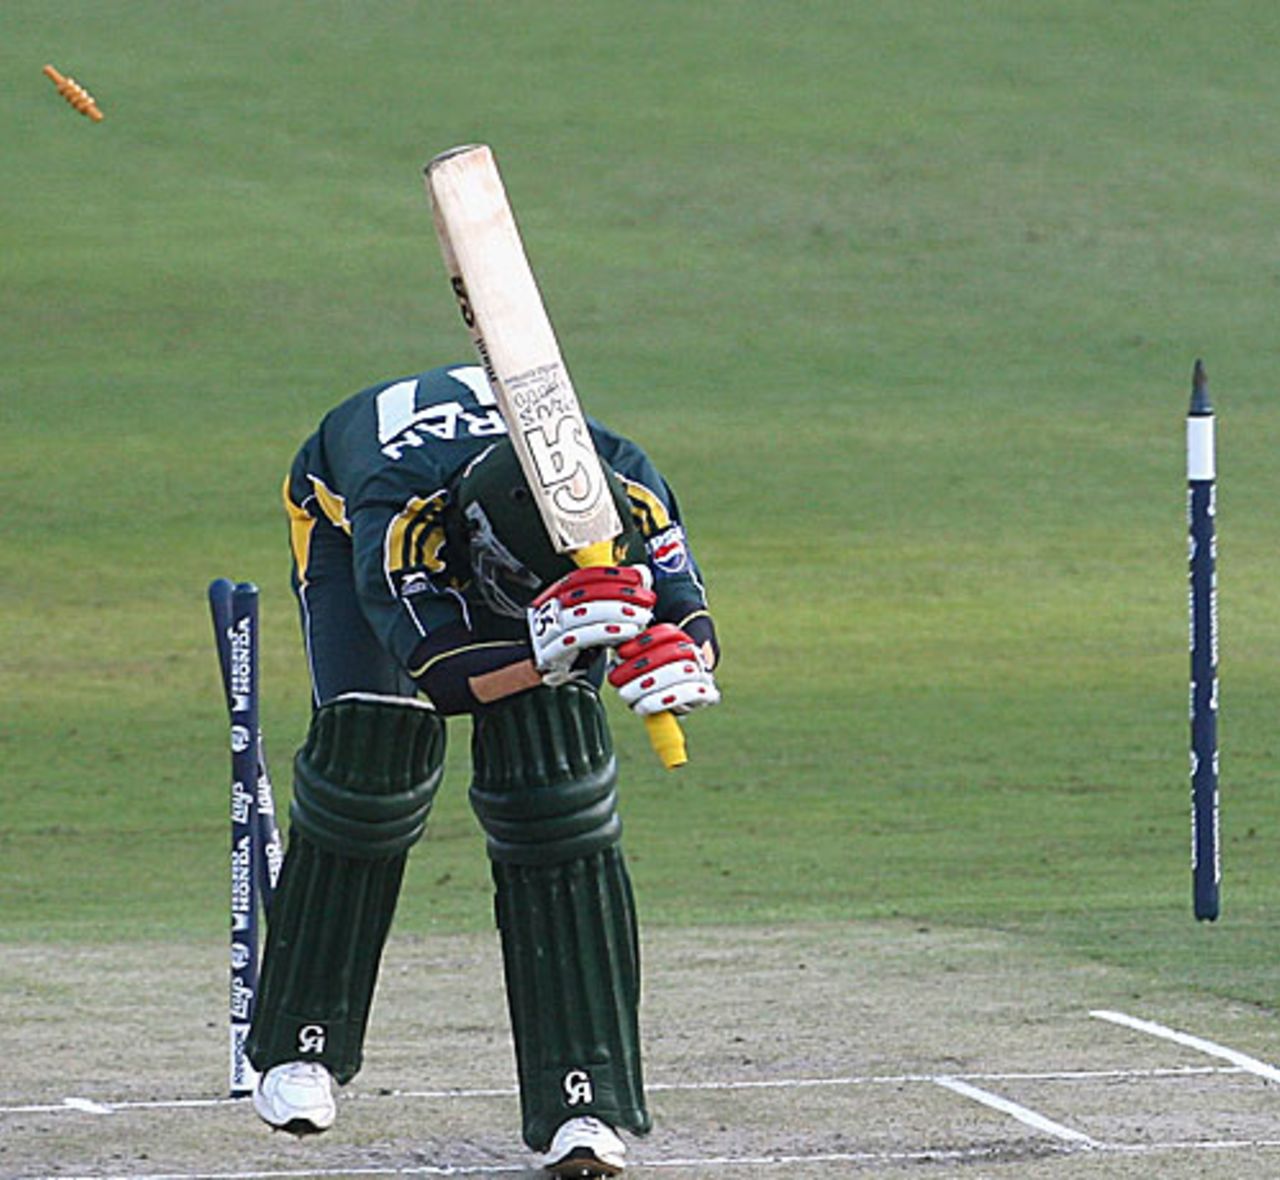 Gavin Tonge makes a mess of Imran Nazir's stumps, Pakistan v West Indies, Champions Trophy, Group A, Johannesburg, September 23, 2009